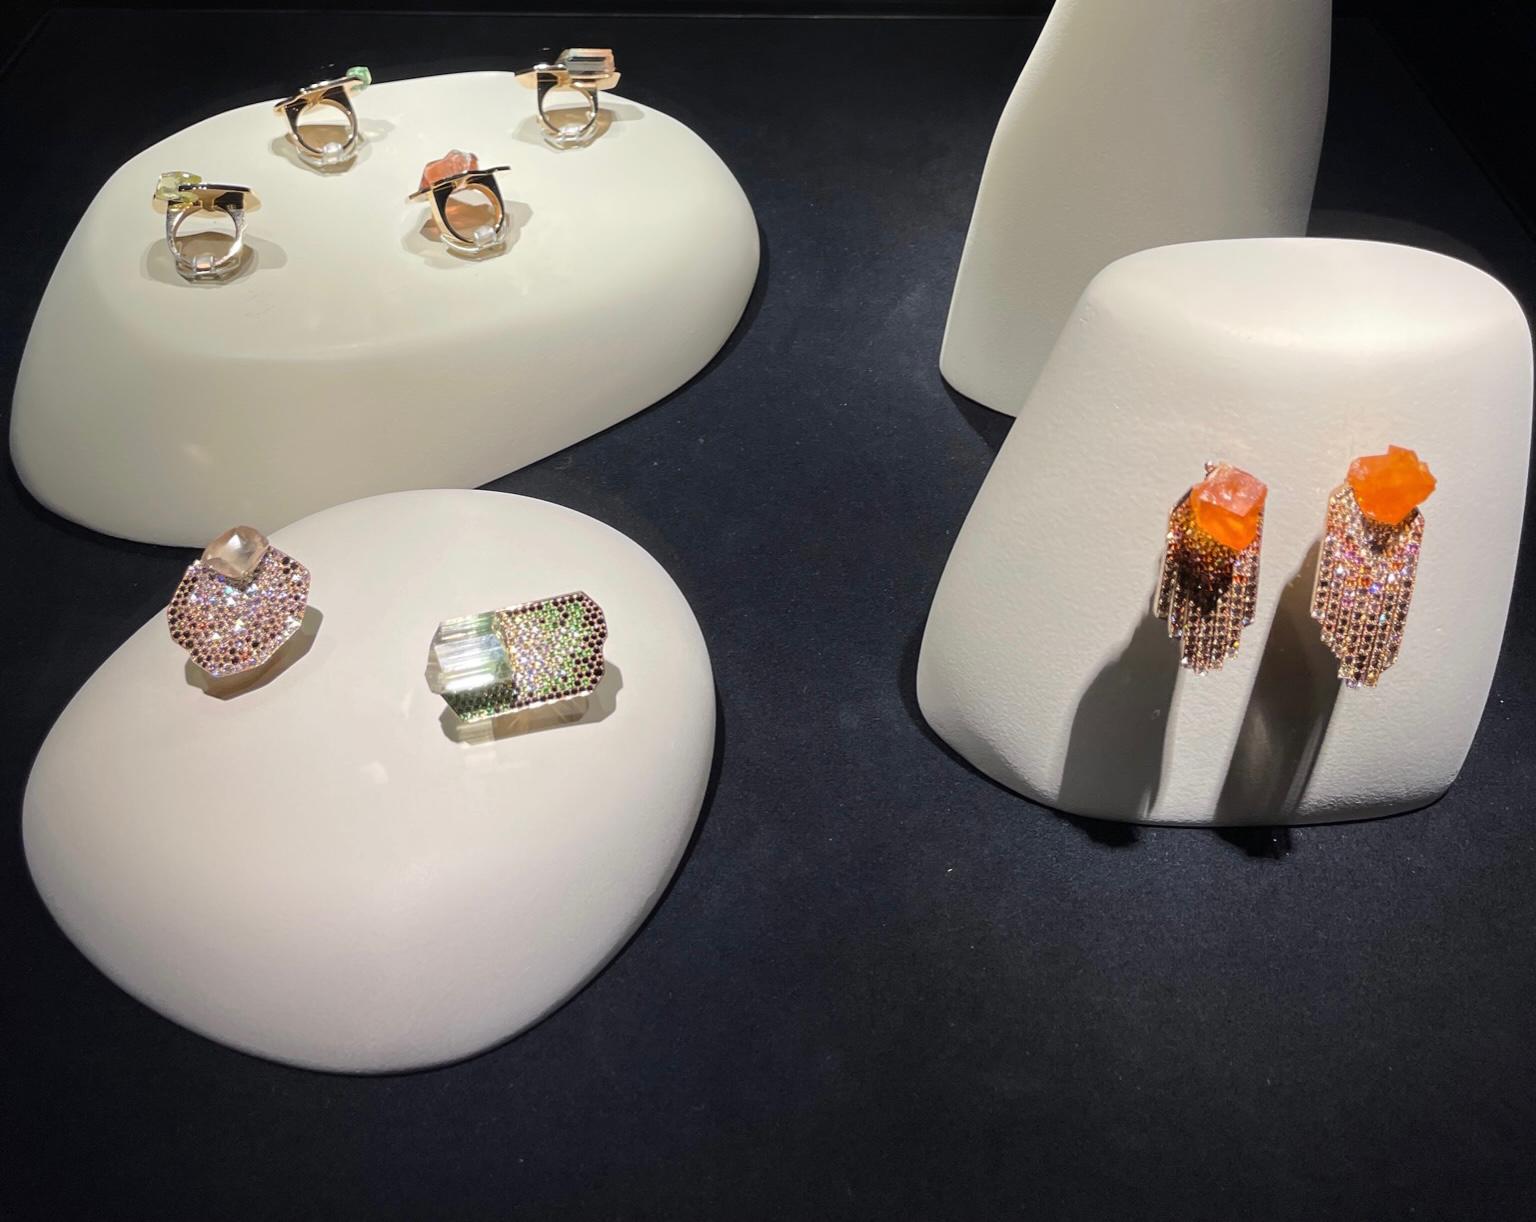 The new Hermès jewelry collection is on display in Paris